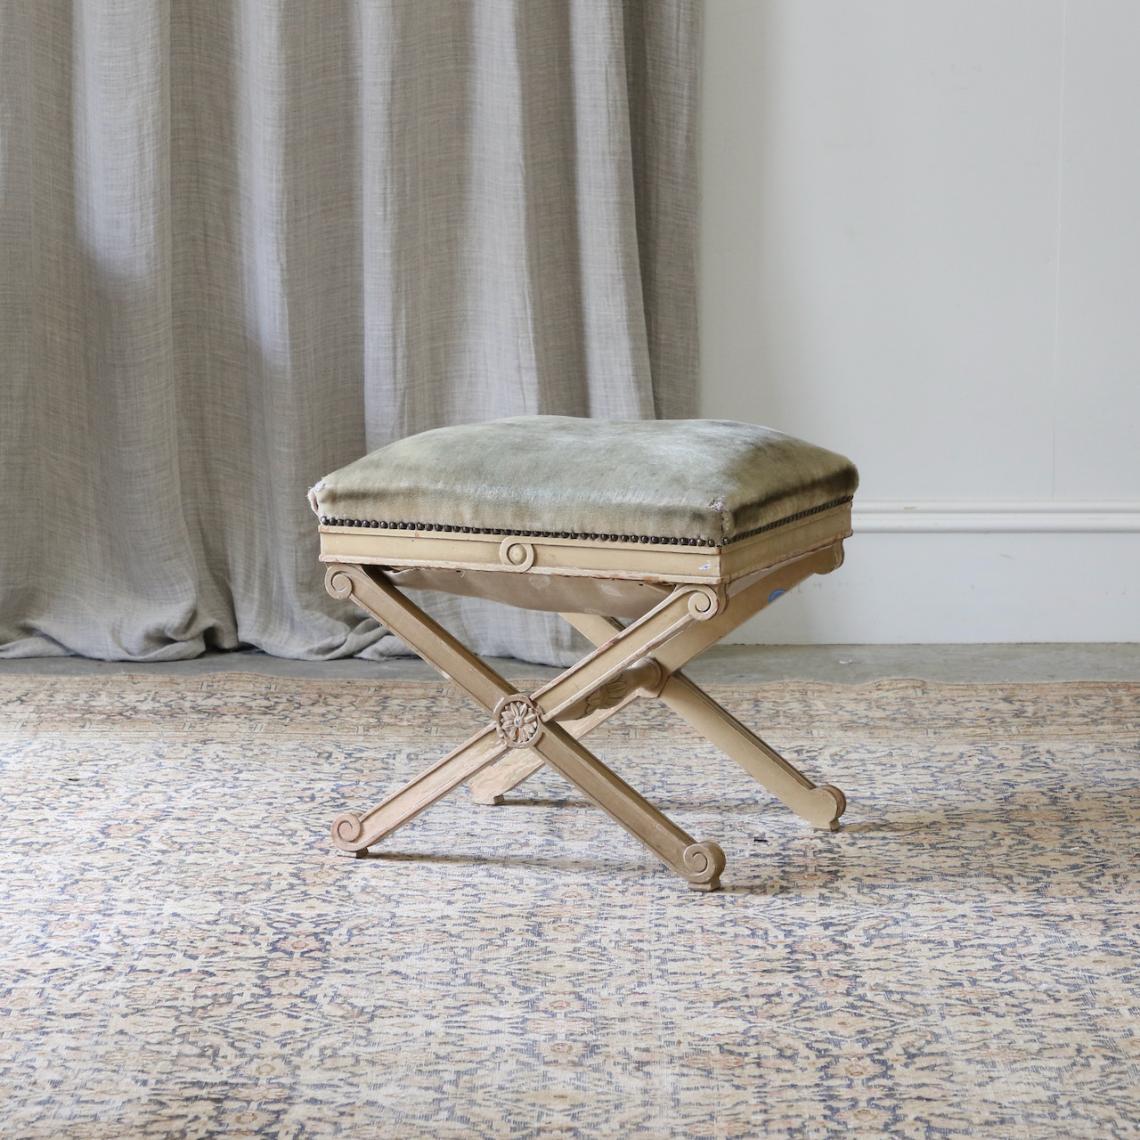 A Swedish/Gustavian Stool in the French Empire Manner